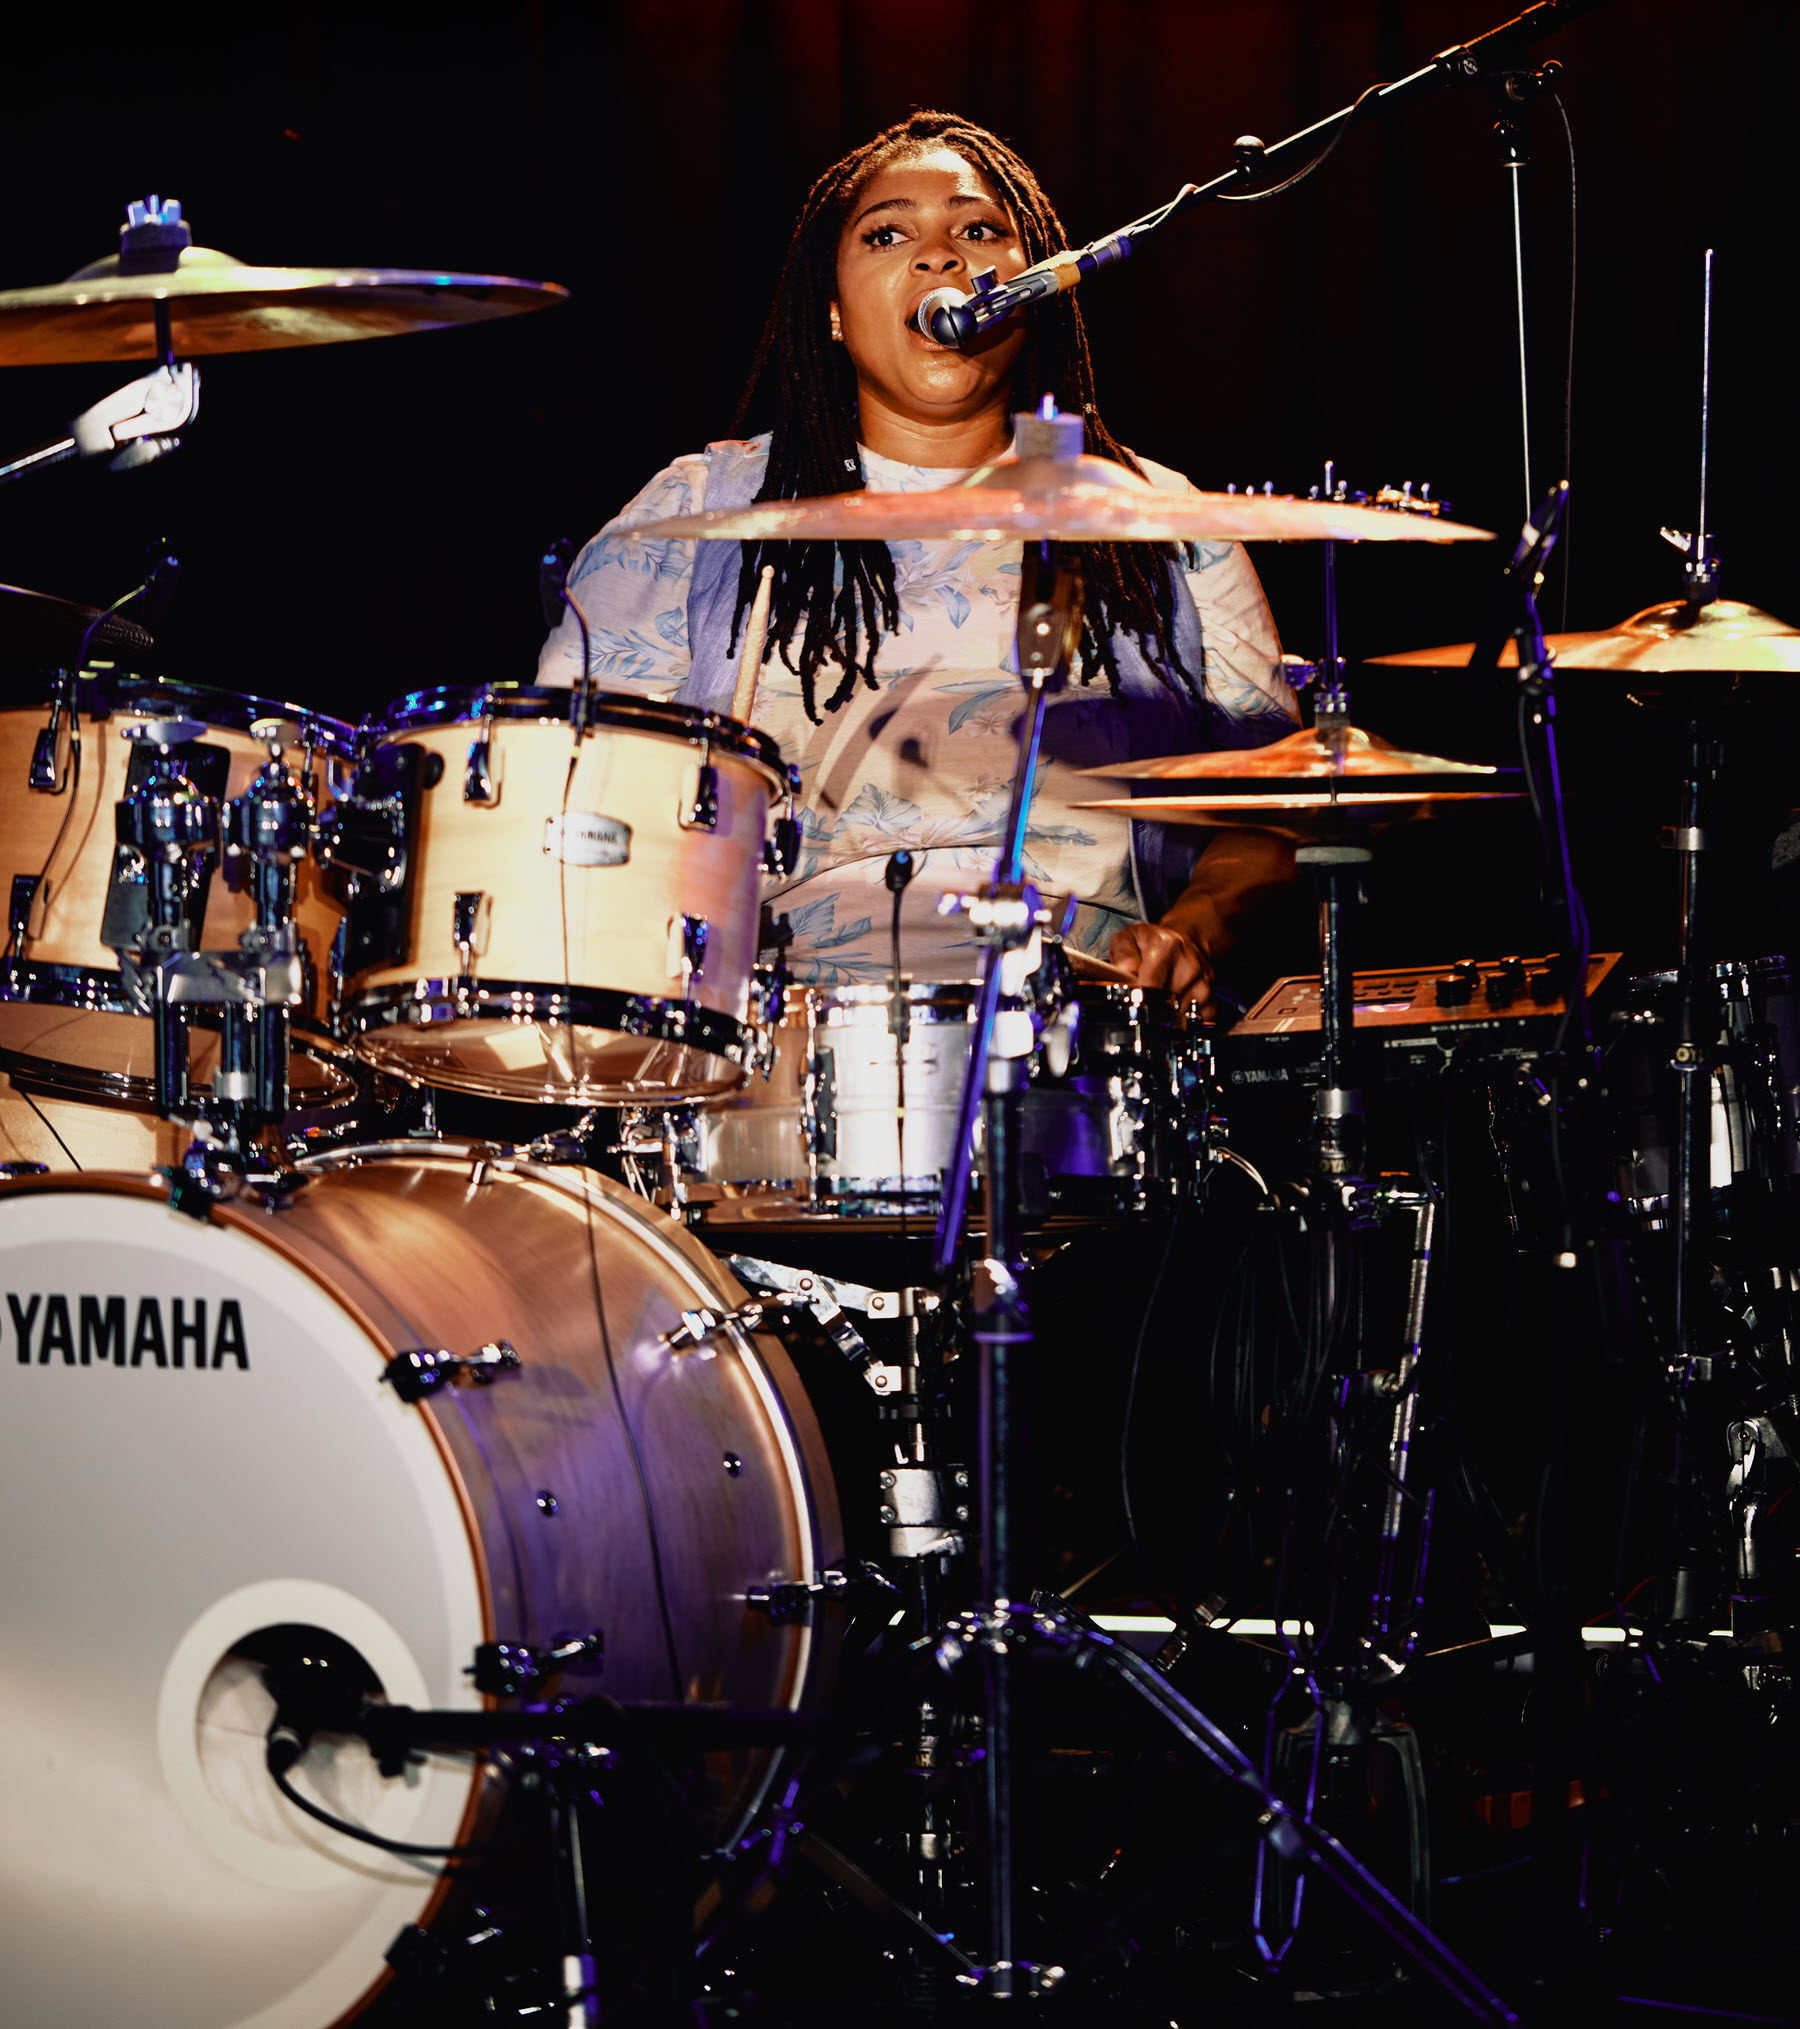 Woman playing drums.